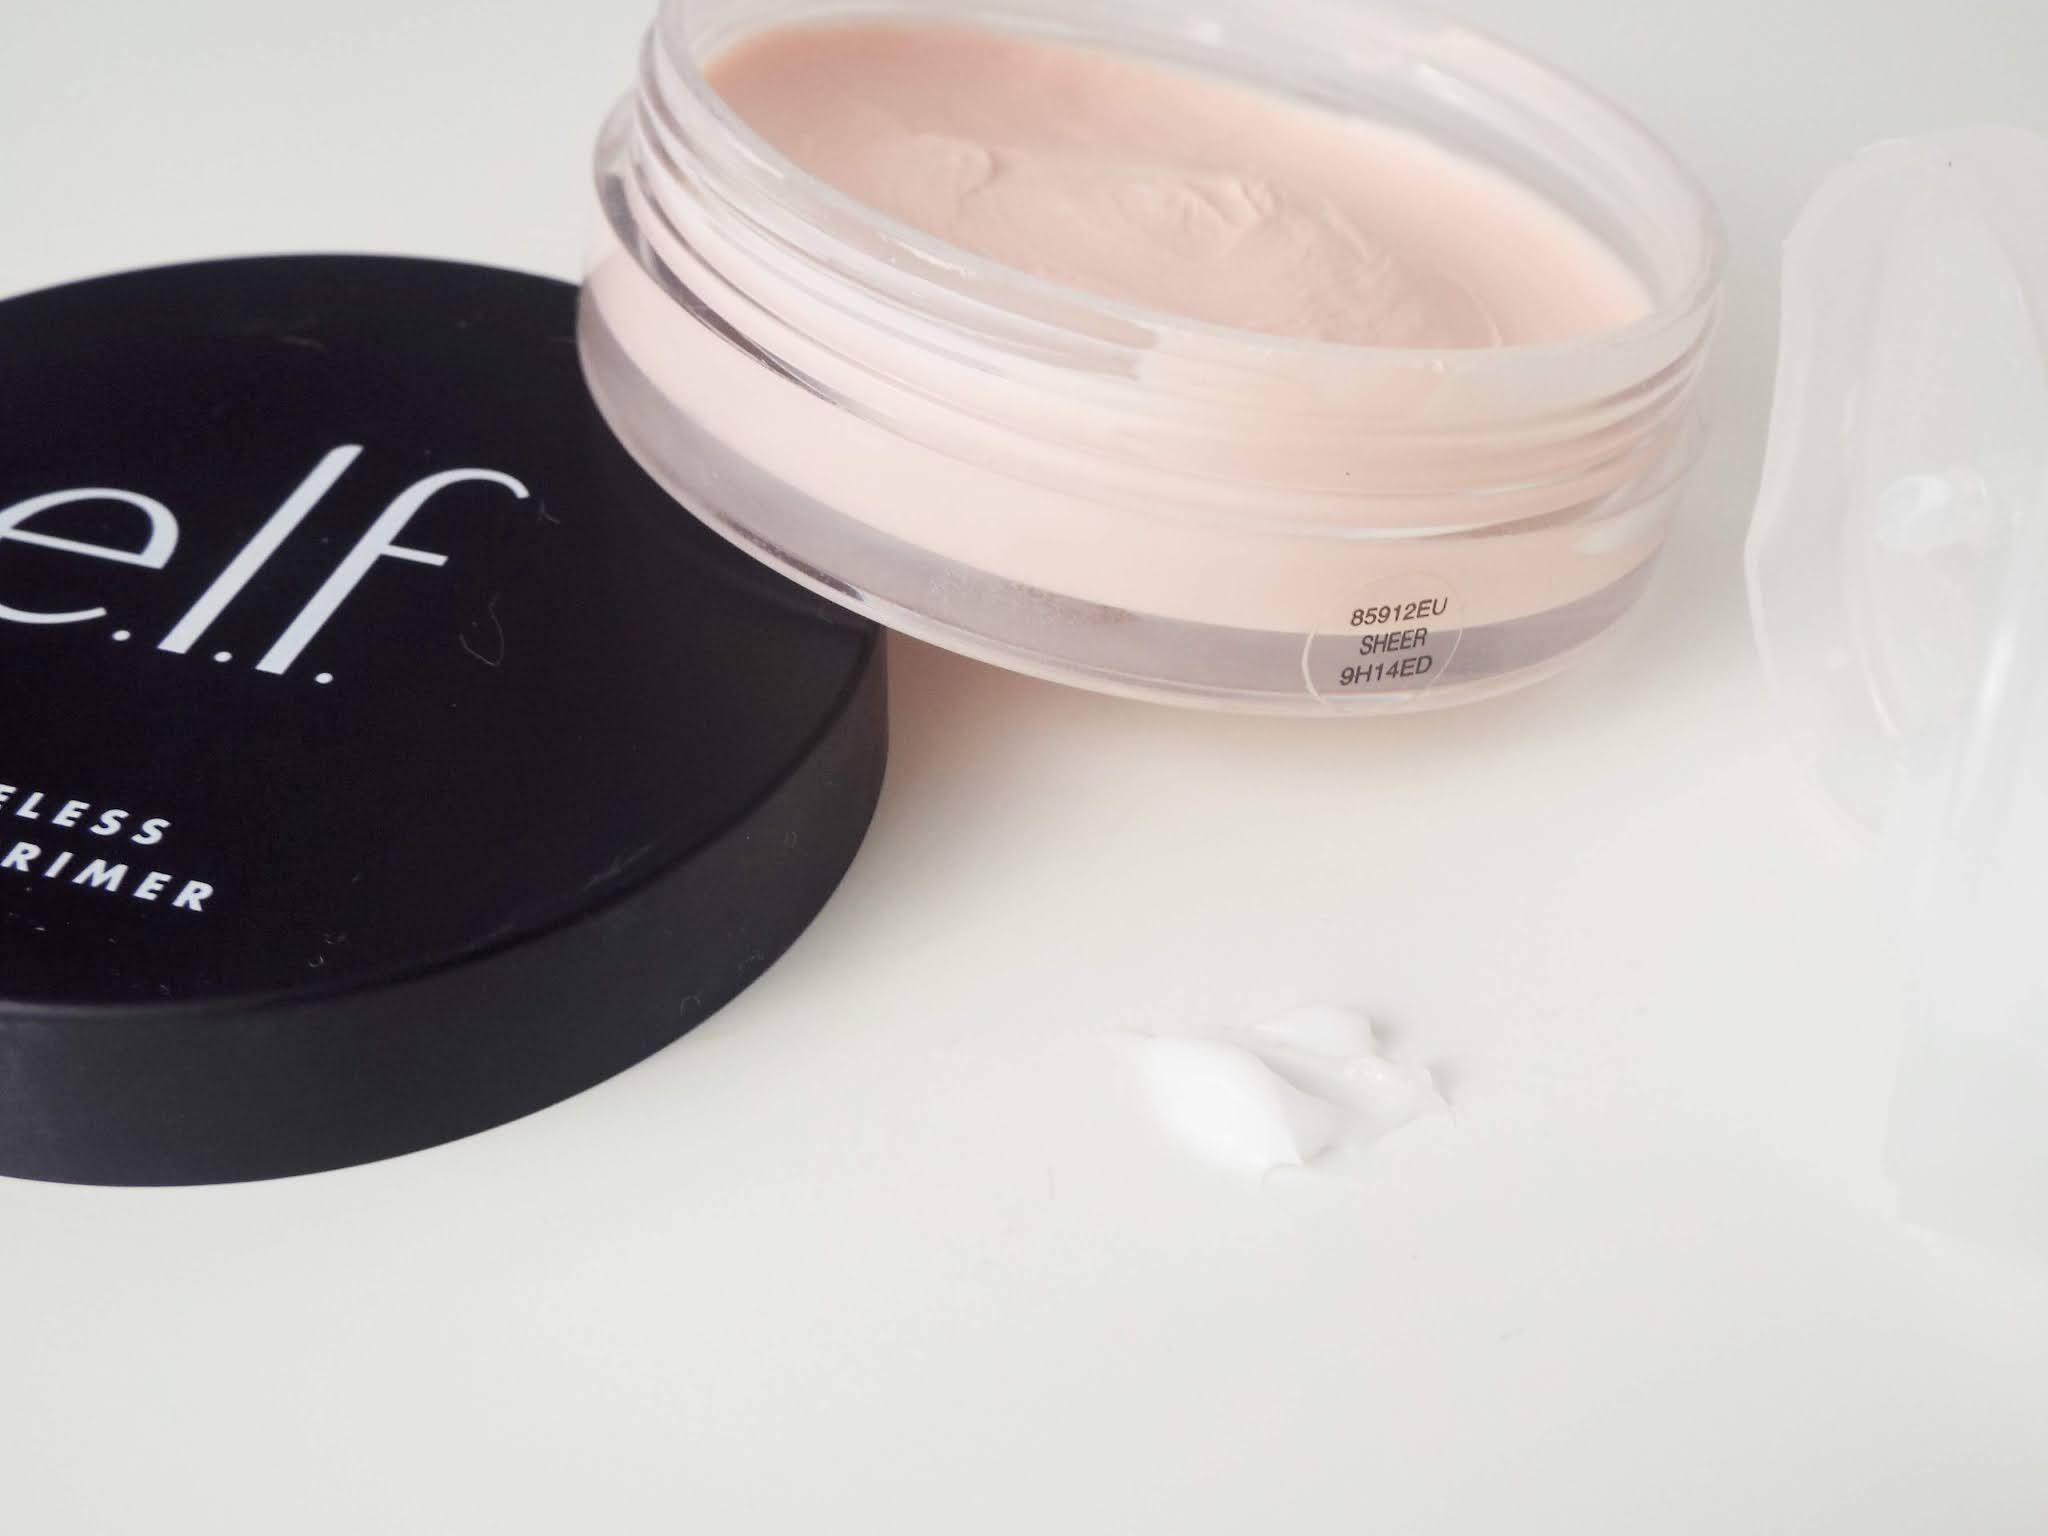 Close up shot of the Elf Poreless Putty Primer, open with lid resting just aside, revealing the light pink putty in pot, with lines from scooping product out. A blob of the opaque Ordinary High-Adherence Silicone primer sits in front, with a smooth but thick consistency.